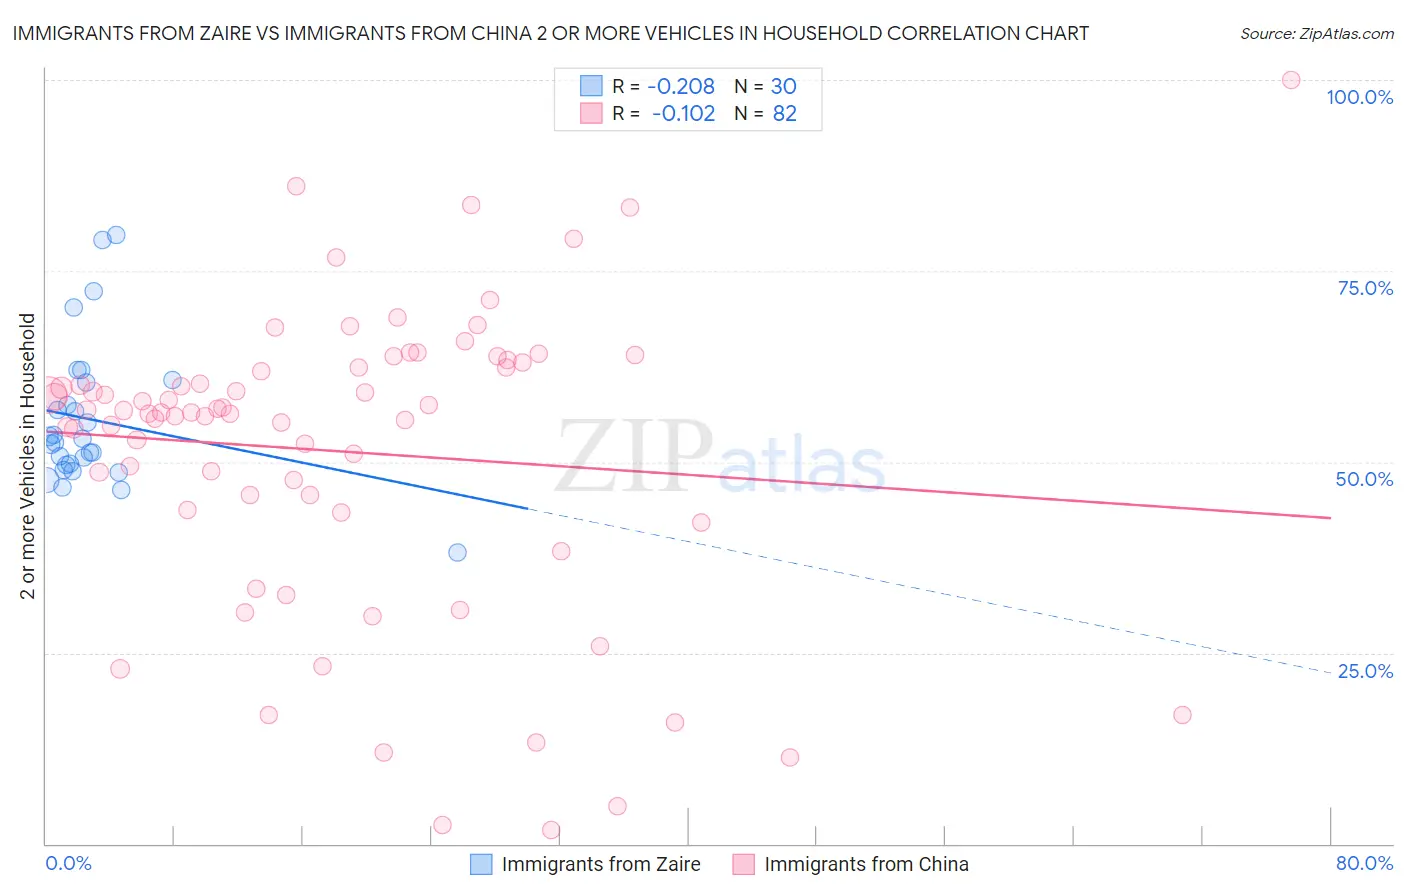 Immigrants from Zaire vs Immigrants from China 2 or more Vehicles in Household